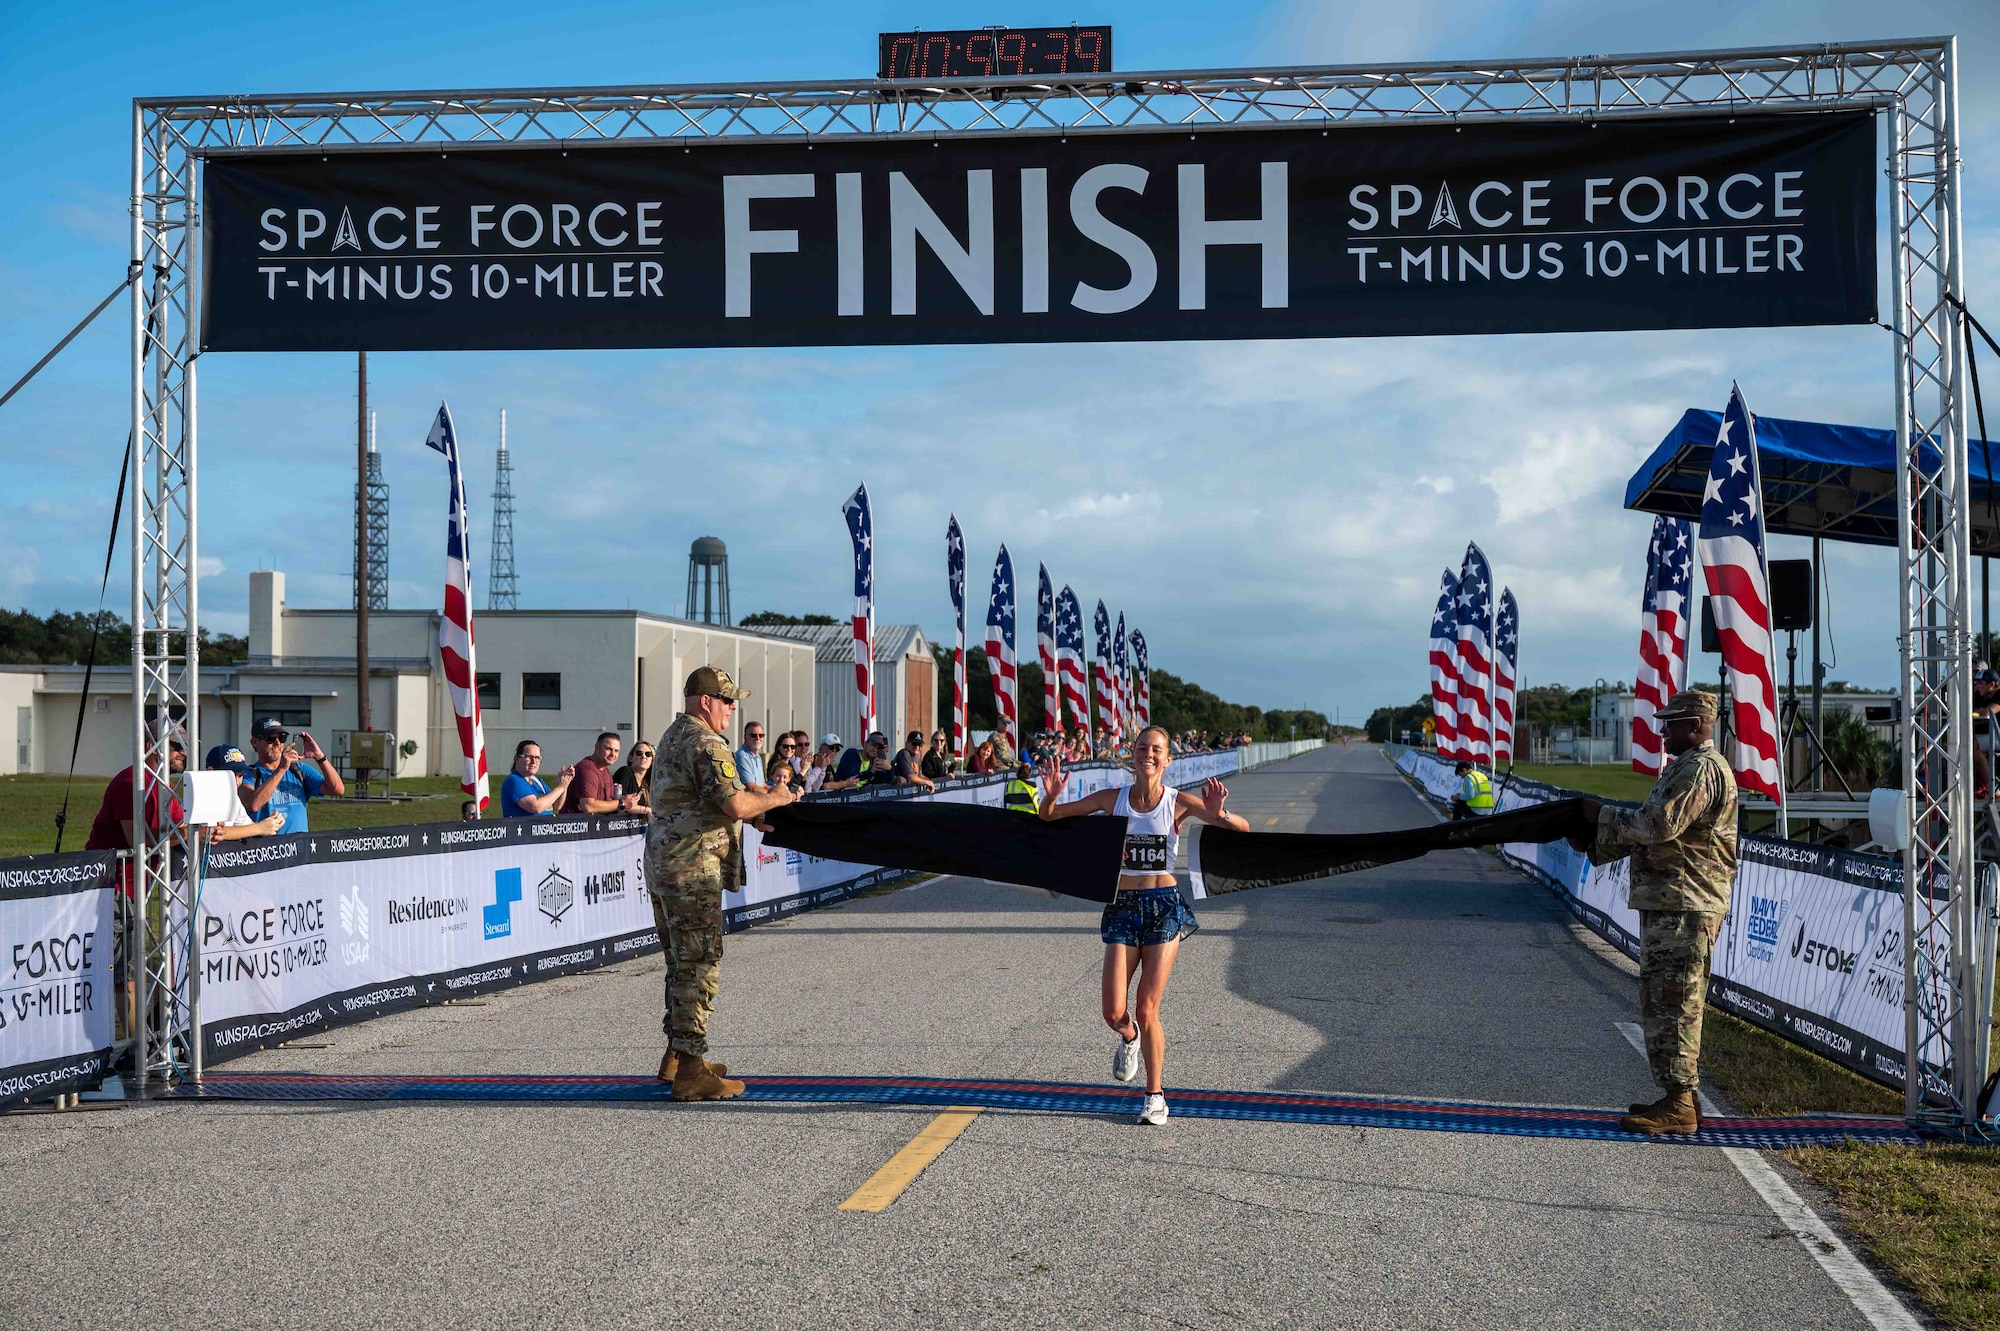 T-Minus 10-Miler participant crosses finish line at Cape Canaveral Space Force Station, Florida, Dec. 9, 2023. The T-Minus 10-Miler celebrates the Space Forces birthday. (U.S. Space Force photo by Senior Airman Samuel Becker)